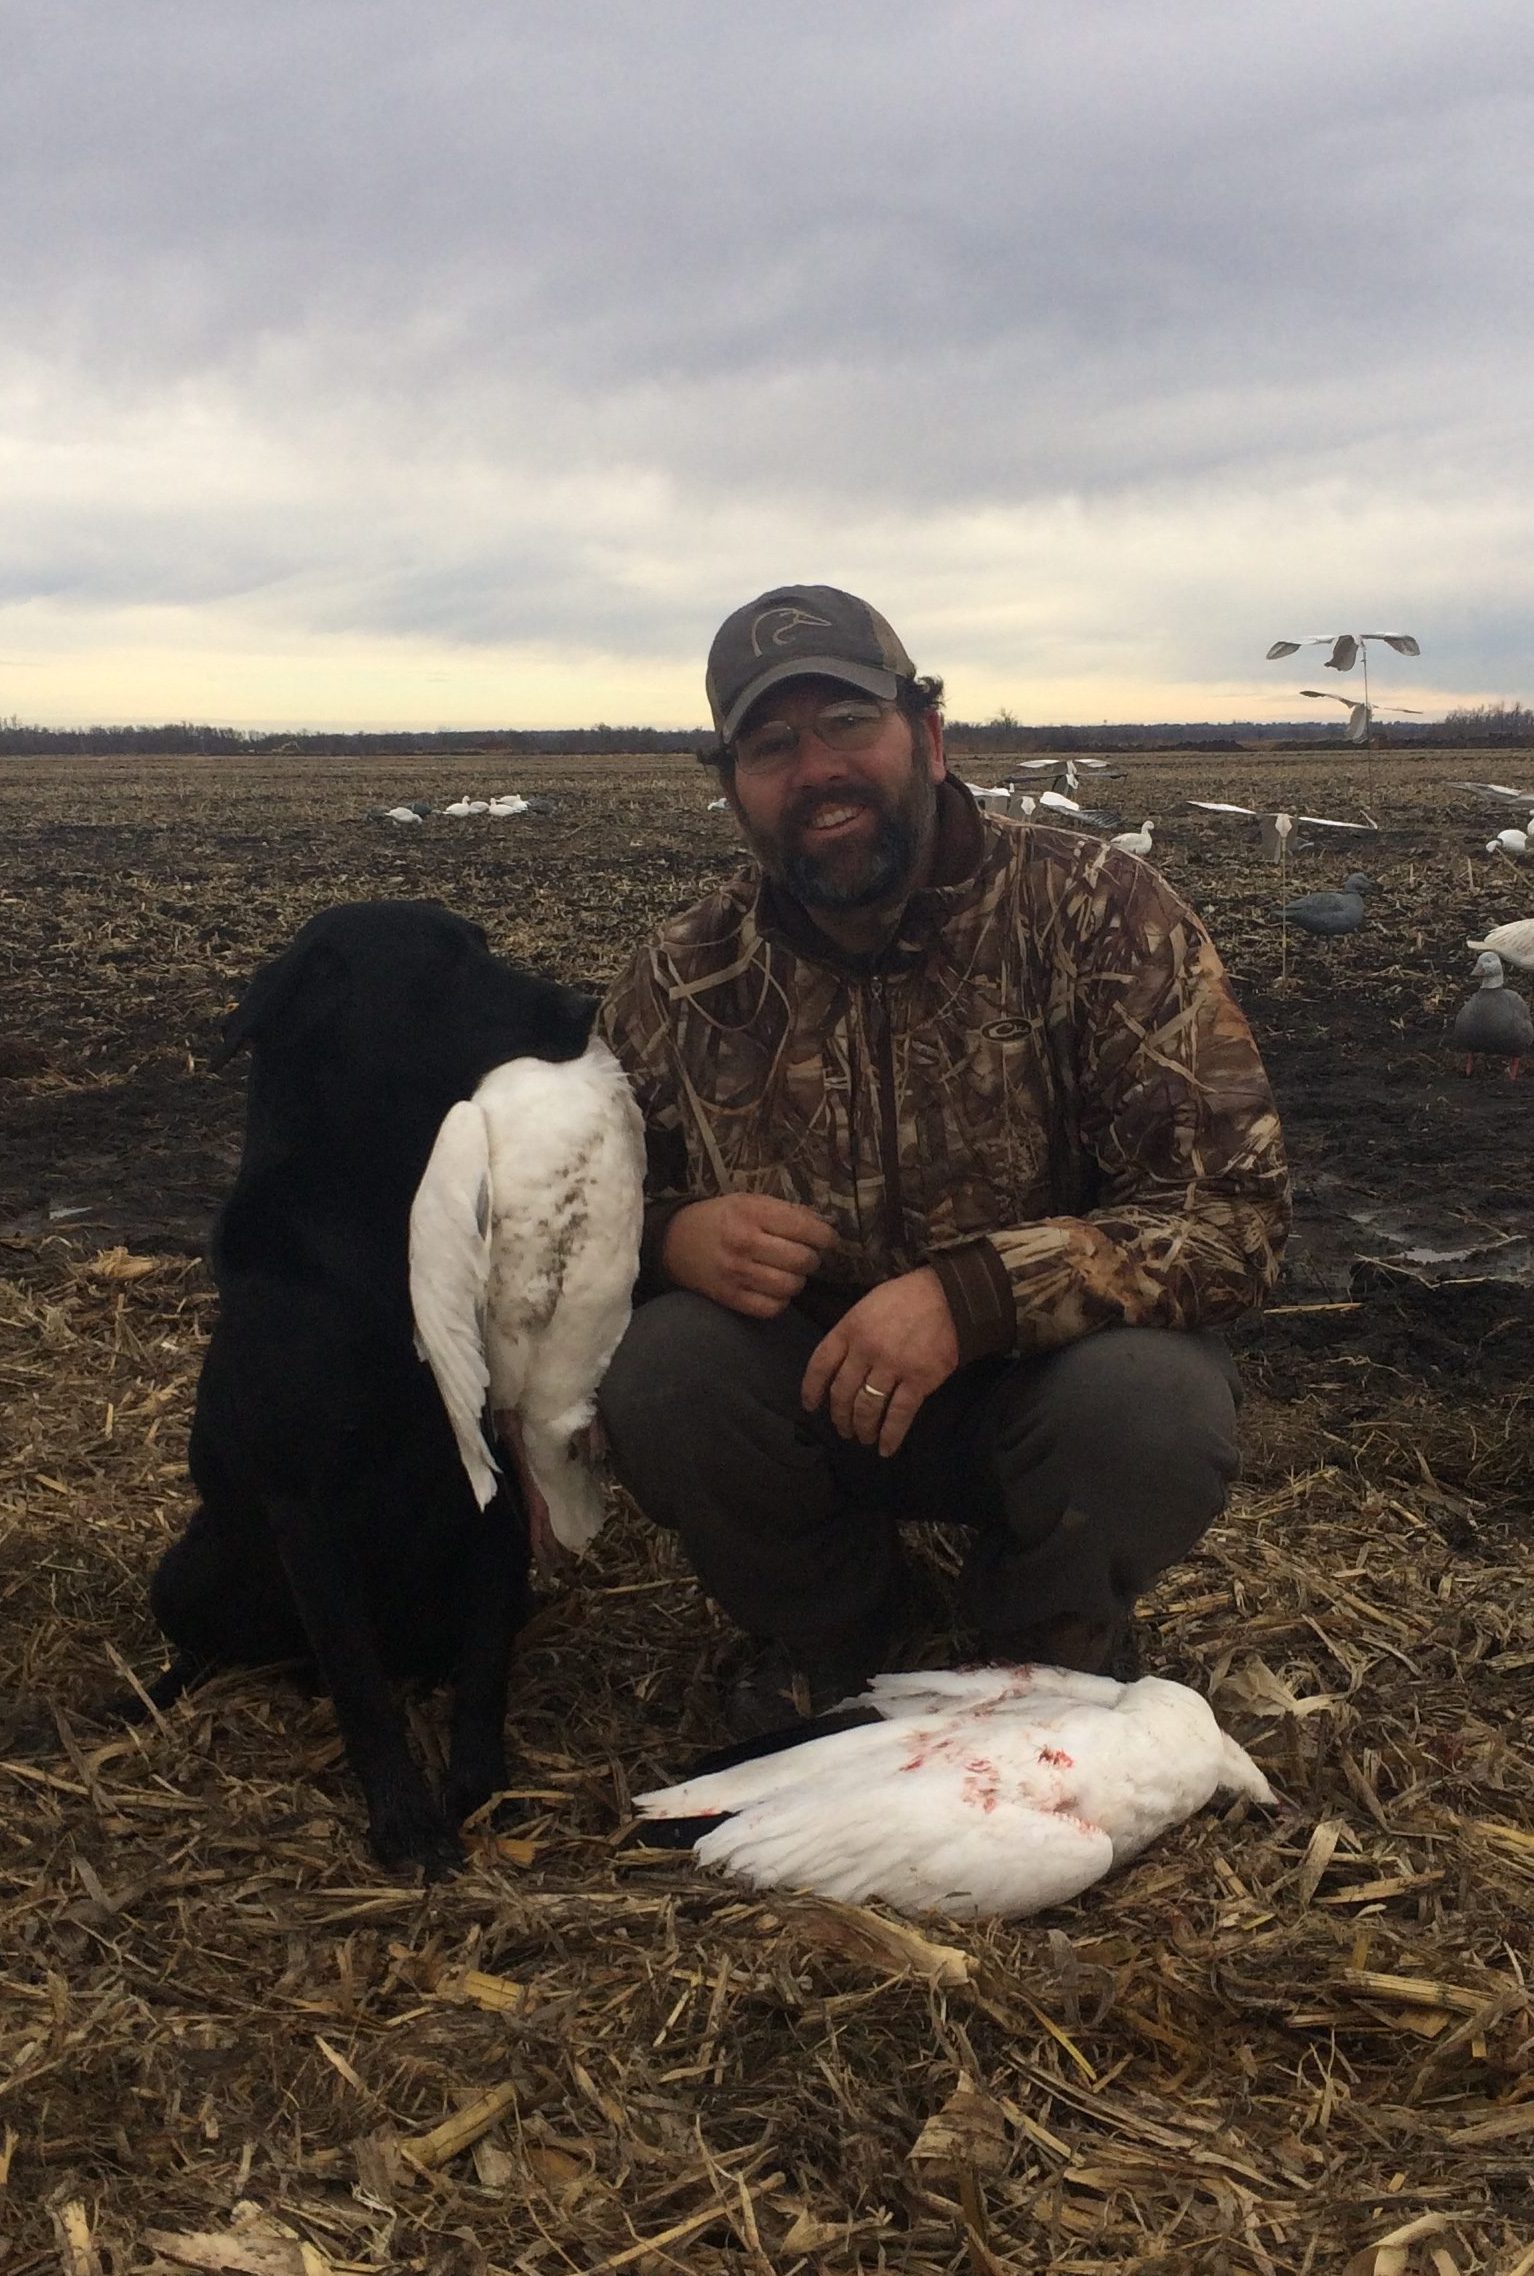 Dan and Max Spring Snow Goose Hunting In Mound City, Missouri